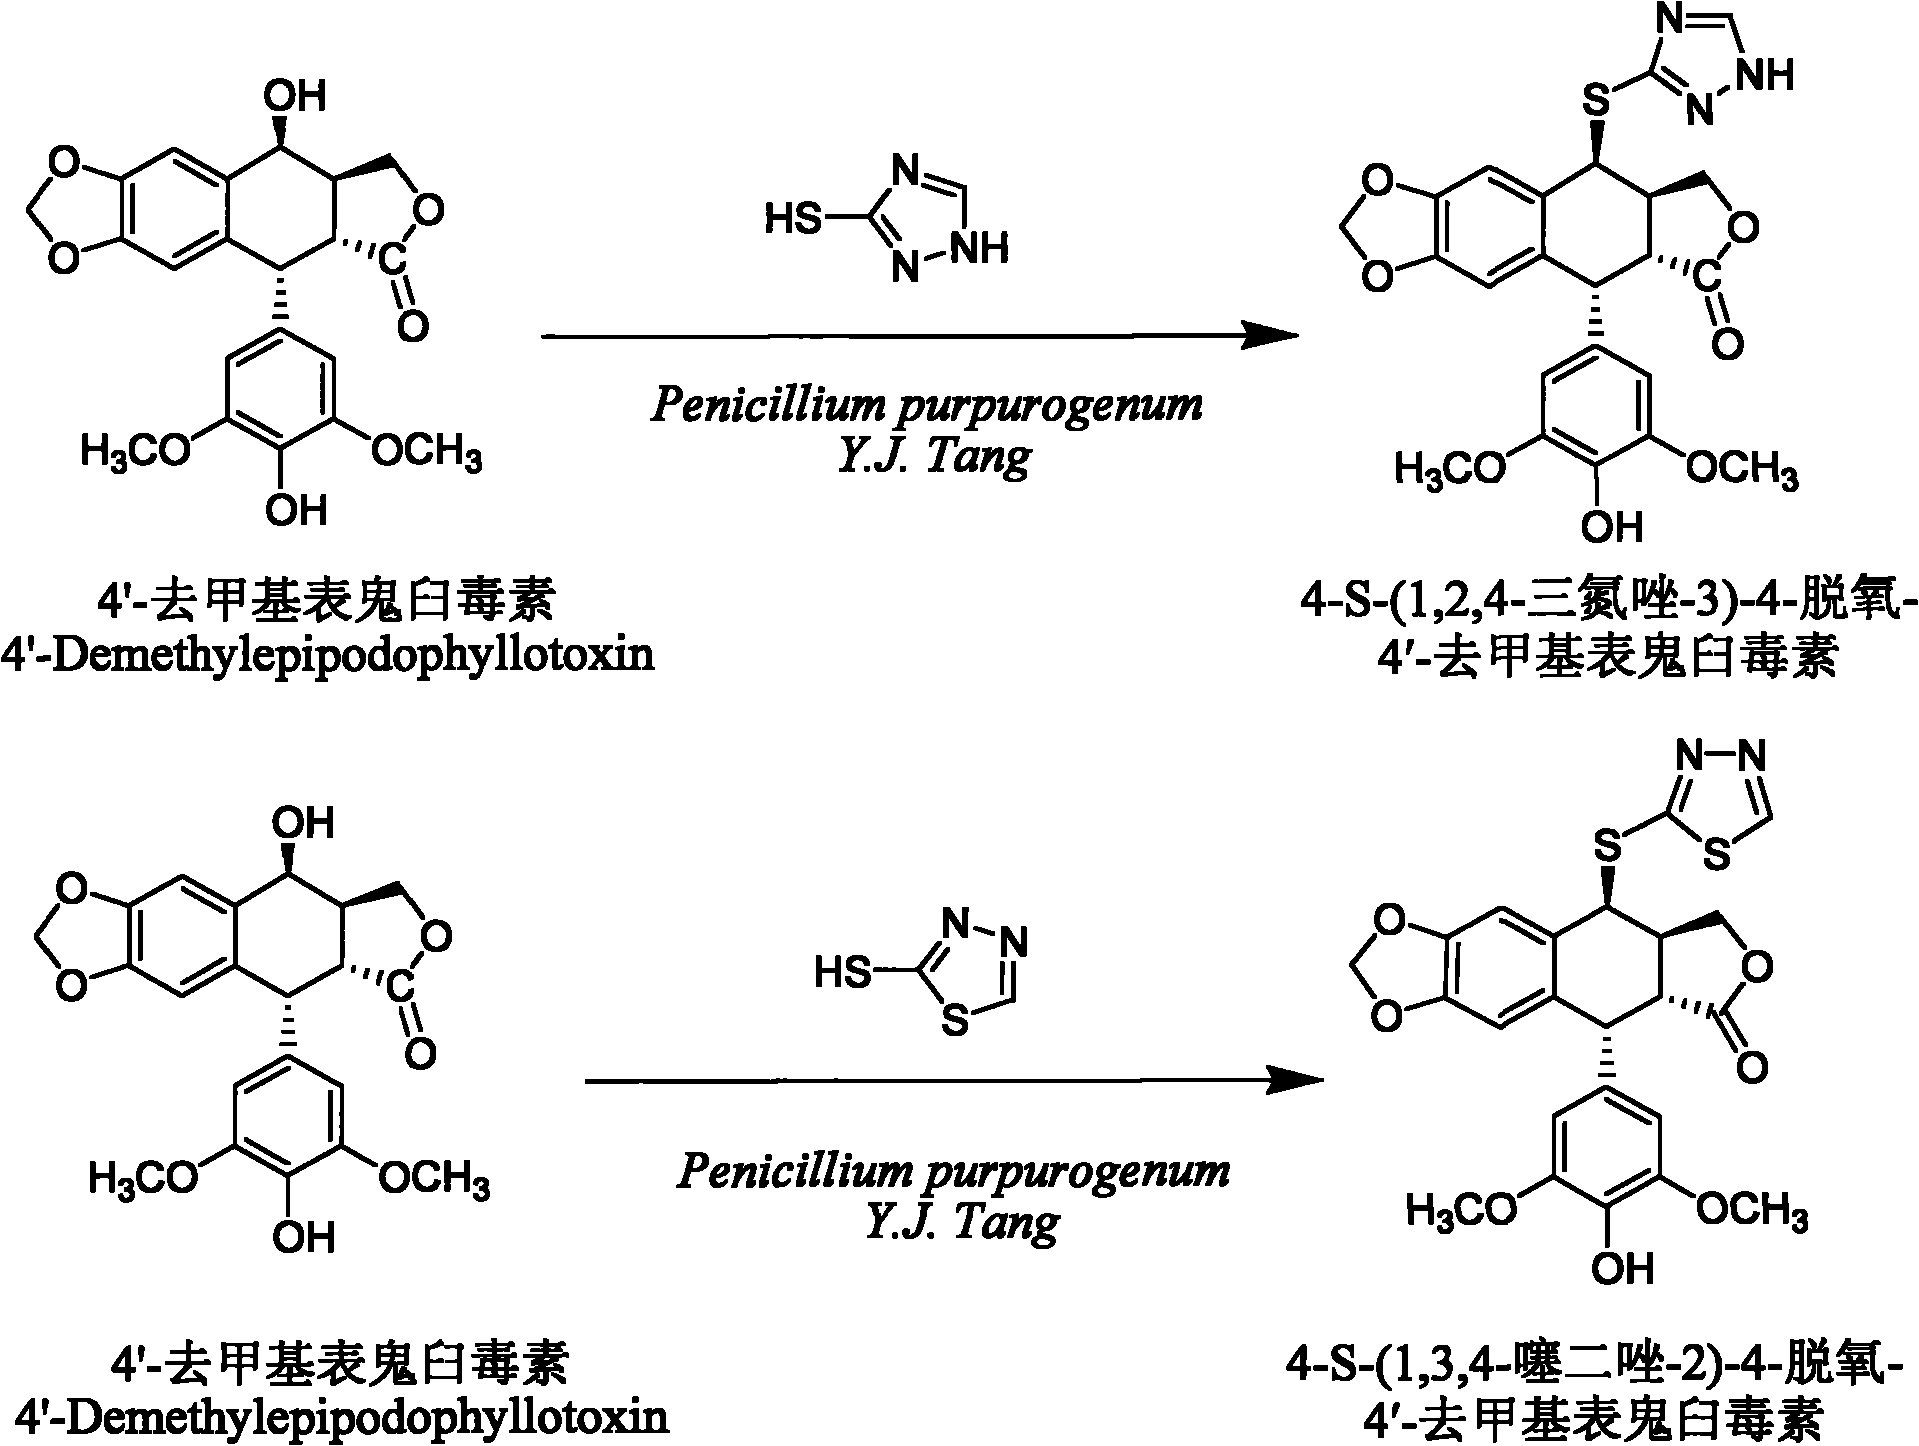 Sulfur-substituted podophyllin derivatives and their biotransformation and separation and purification methods